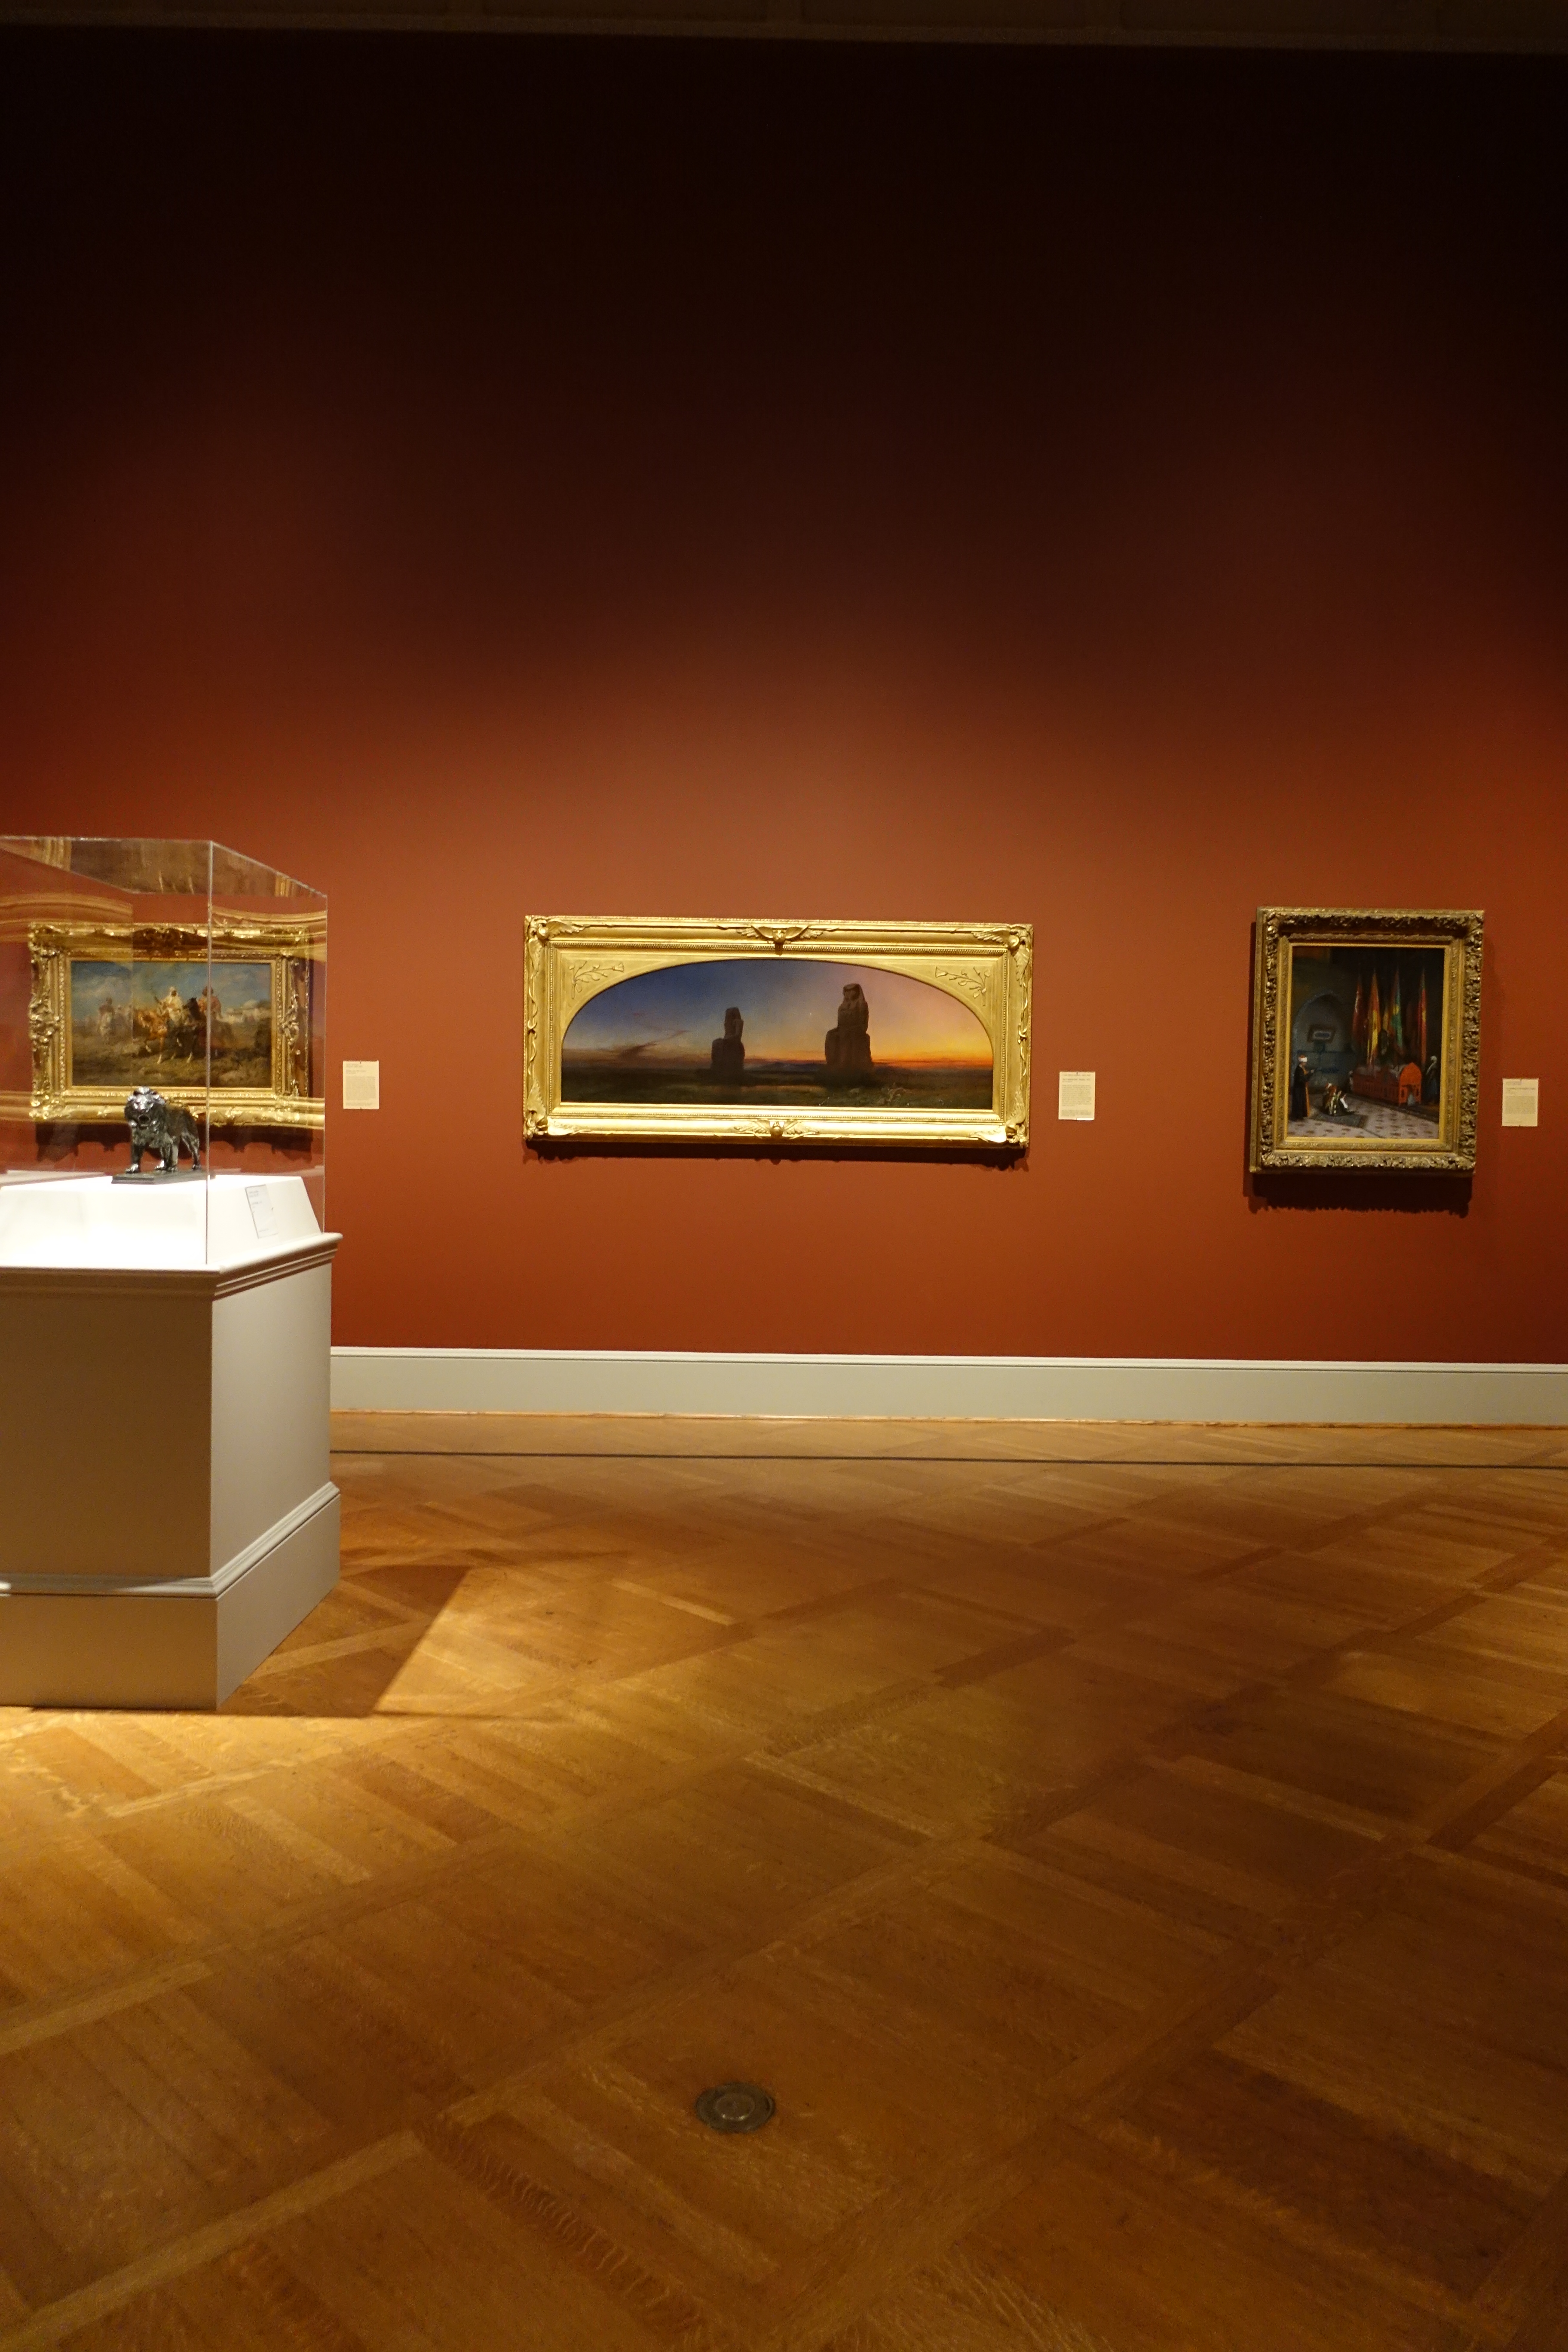 The St. Louis Art Museum on a peaceful day.  Beautiful sunset artwork in a bold gold frame. 